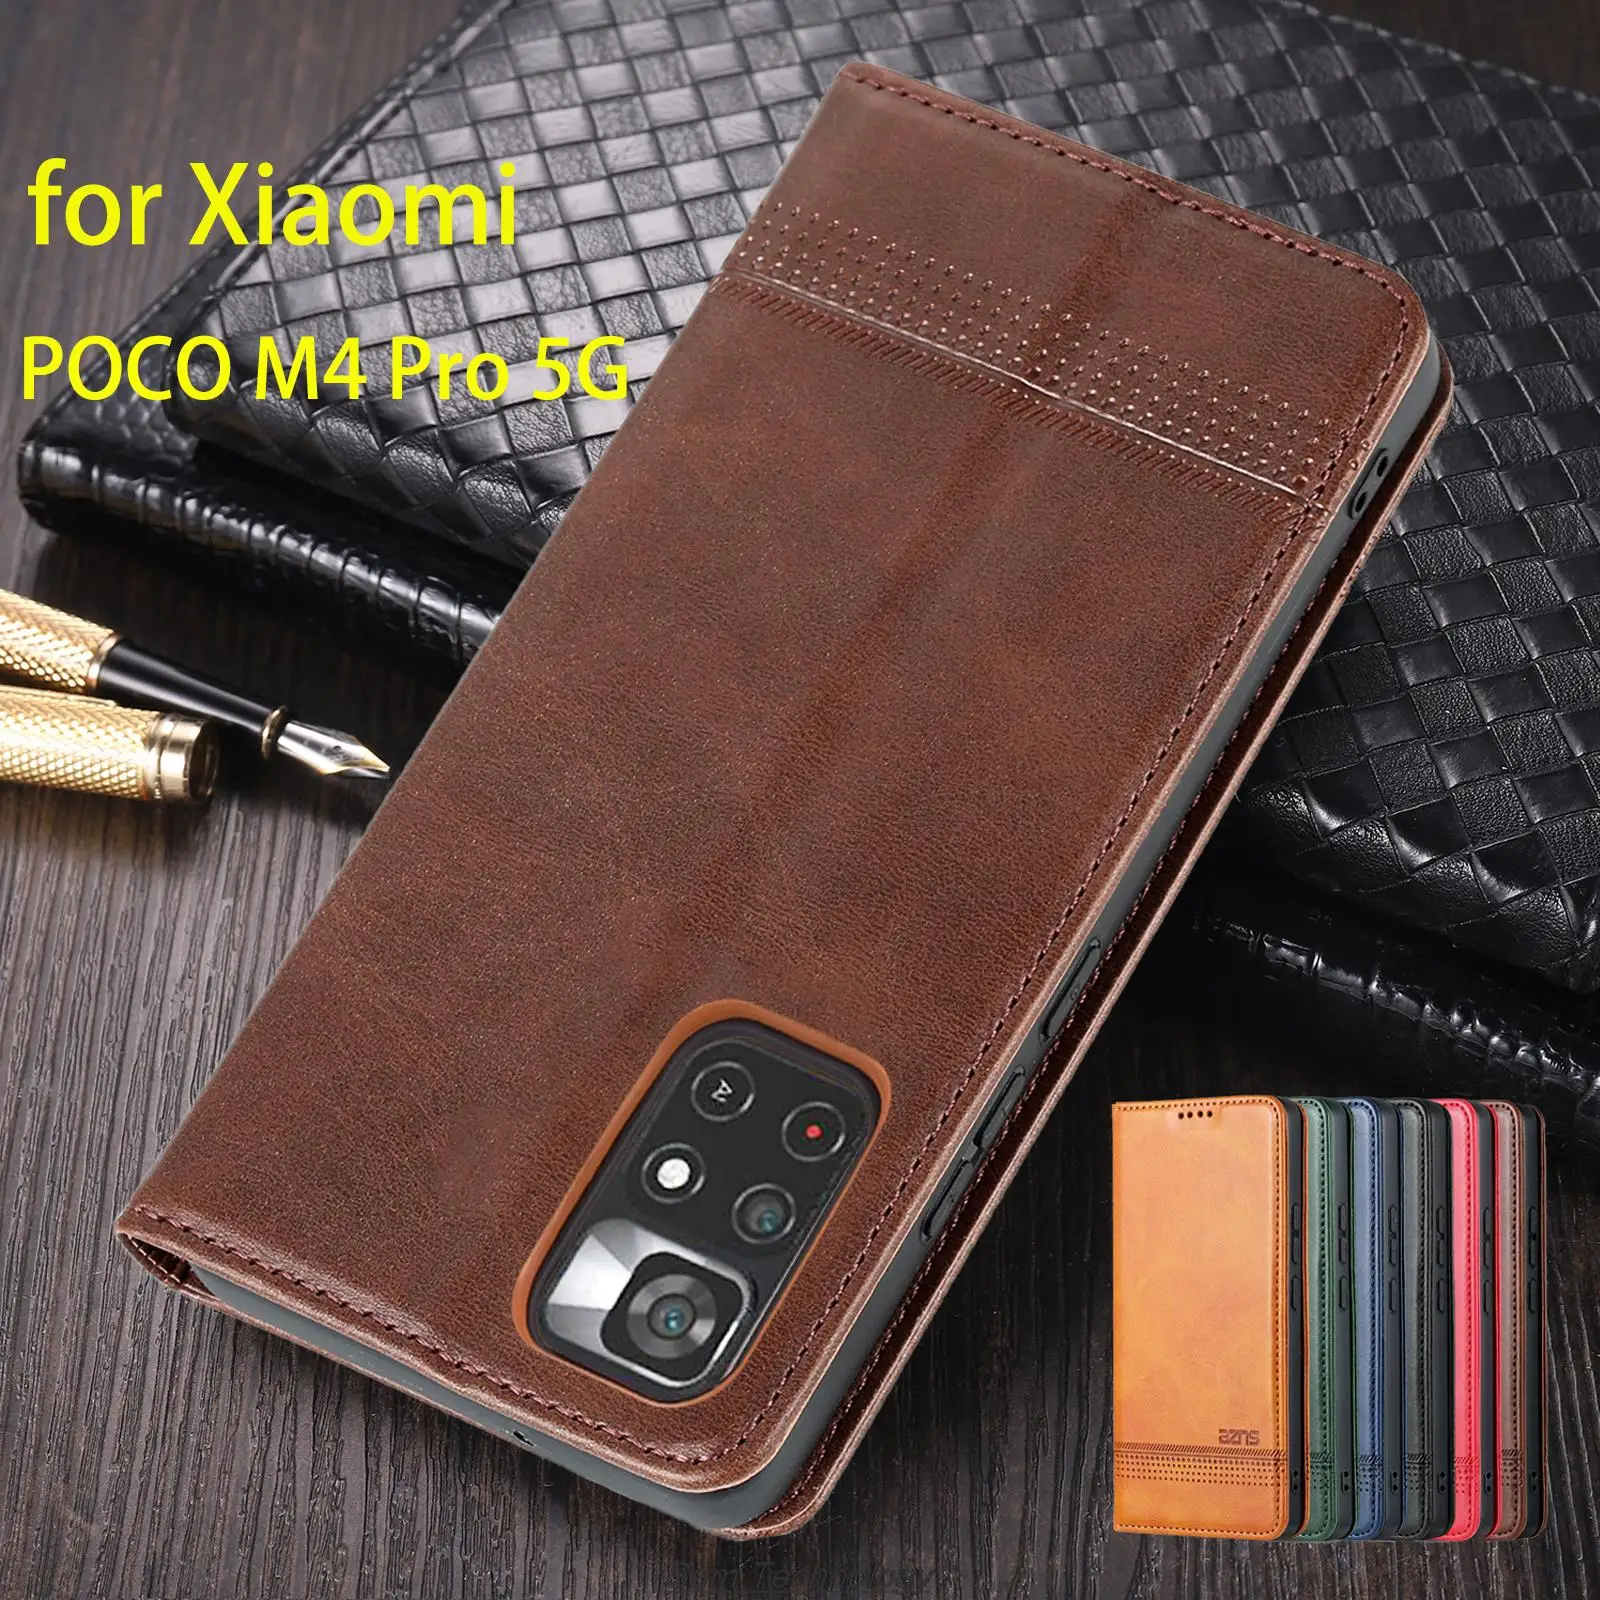 

Deluxe Magnetic Adsorption Leather Fitted Case for Xiaomi POCOPHONE POCO M4 Pro 5G 6.6" Flip Cover Protective Case Fundas Coque